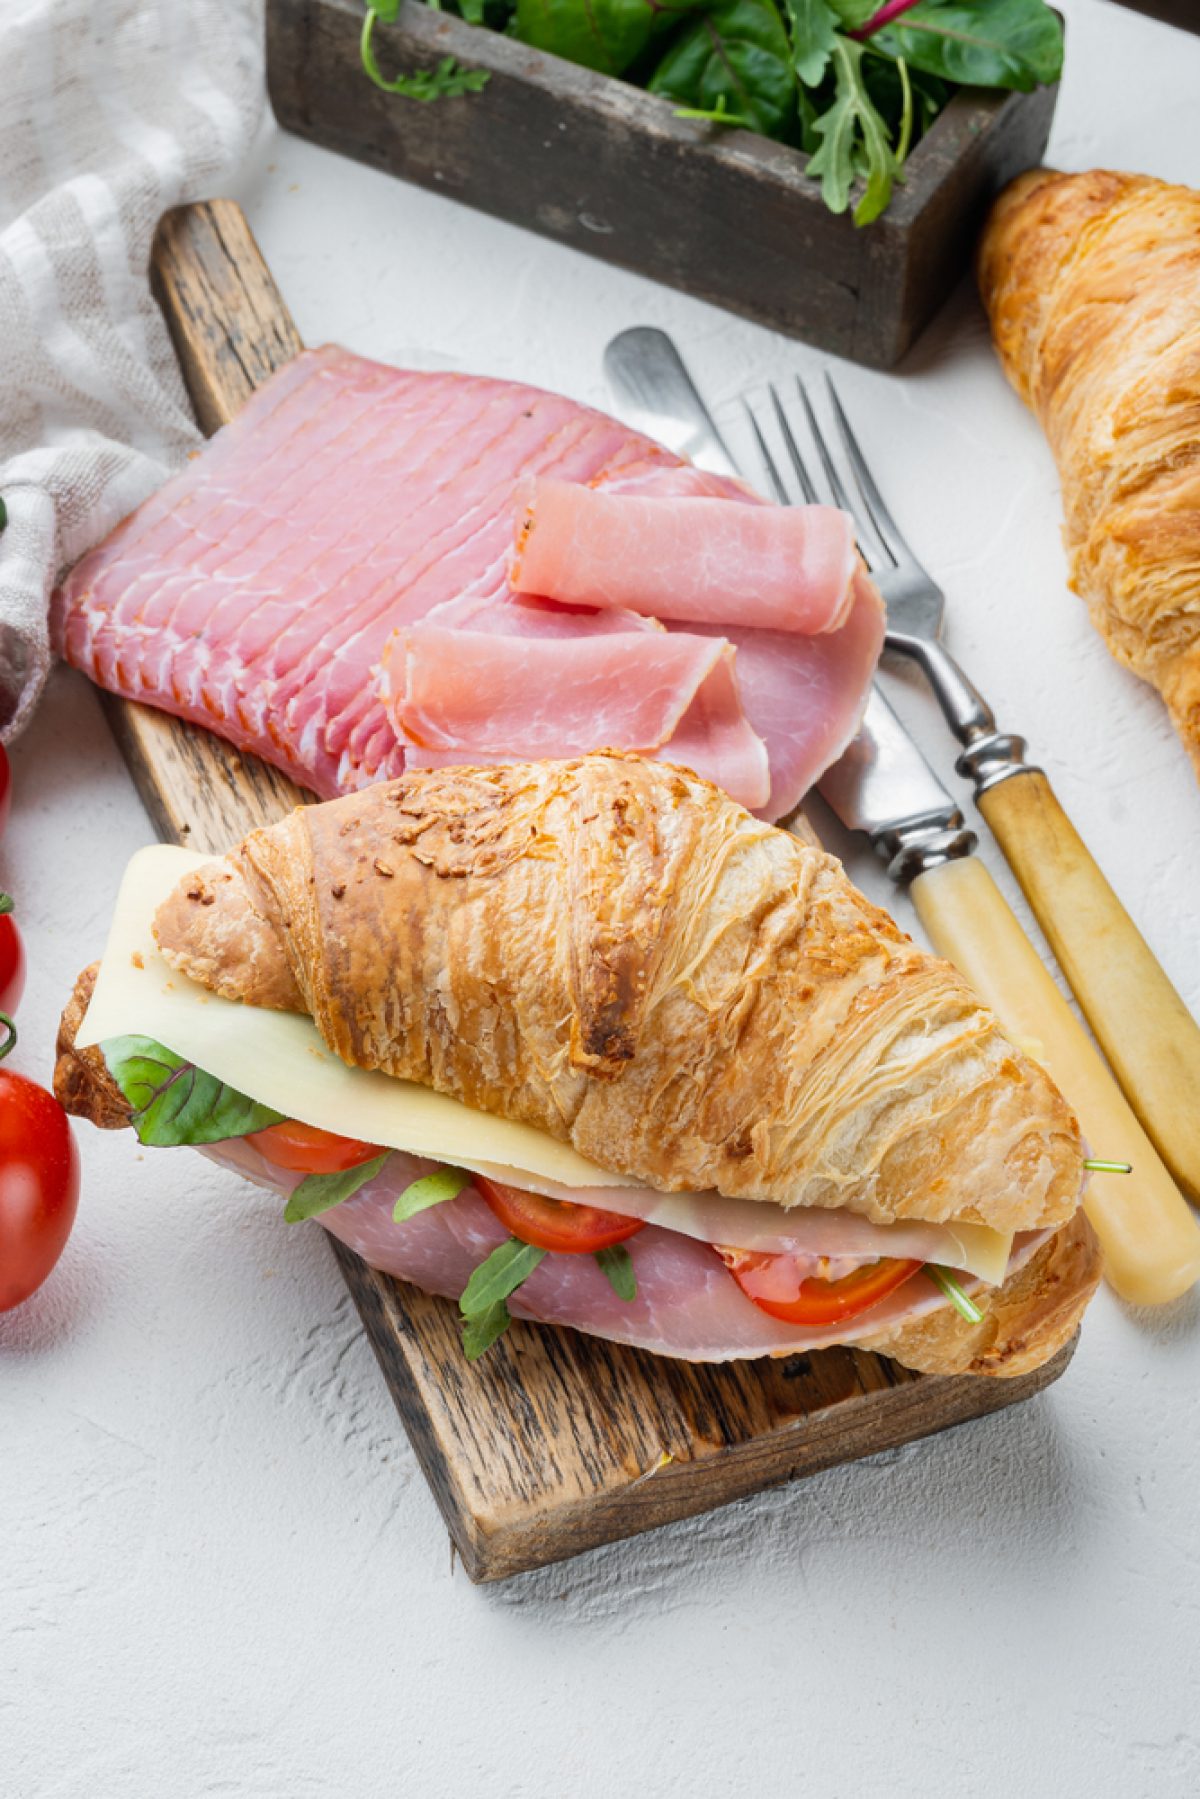 Classic BLT croissant sandwiches set, with herbs and ingredients, on white stone background